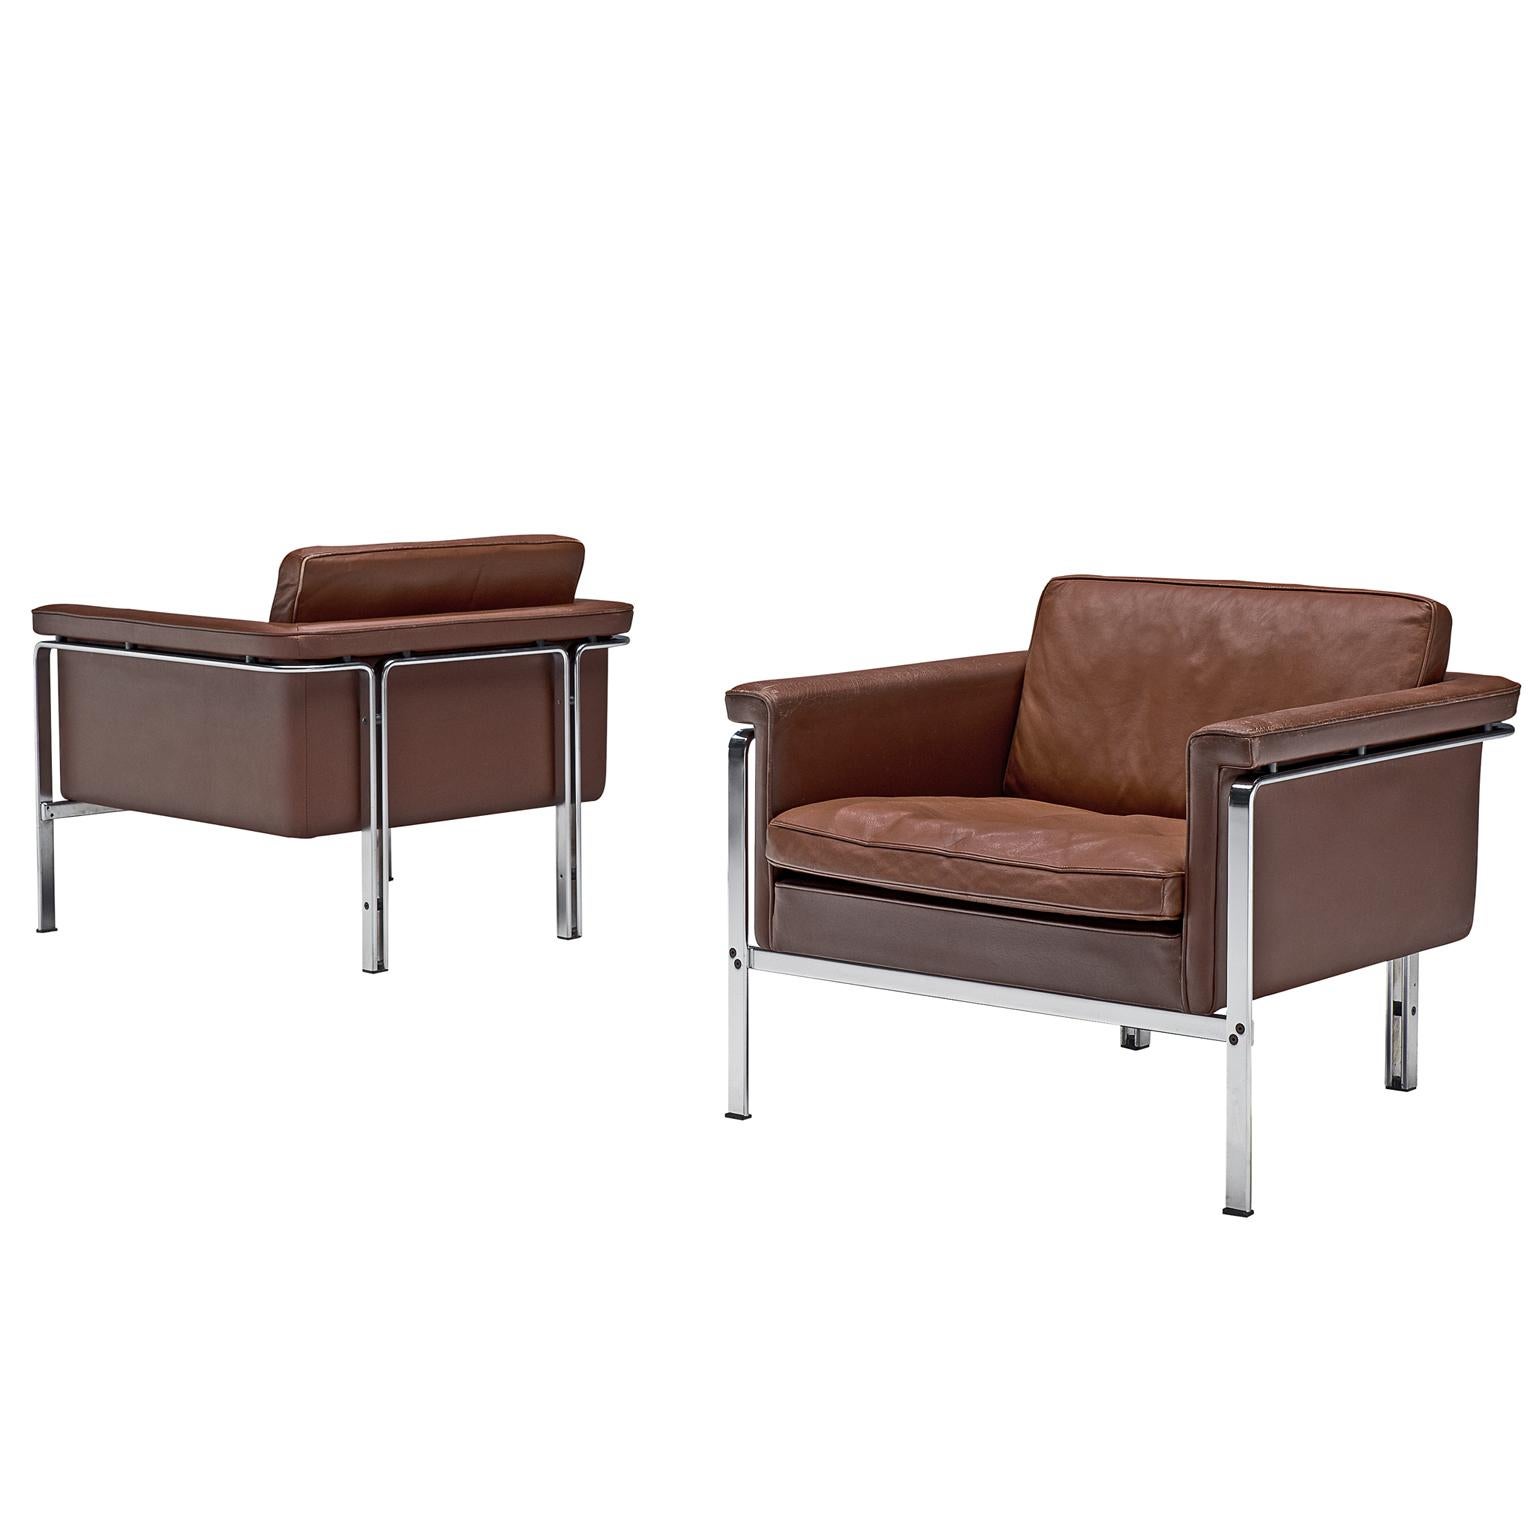 Horst Bruning Lounge Chairs in Brown Leather